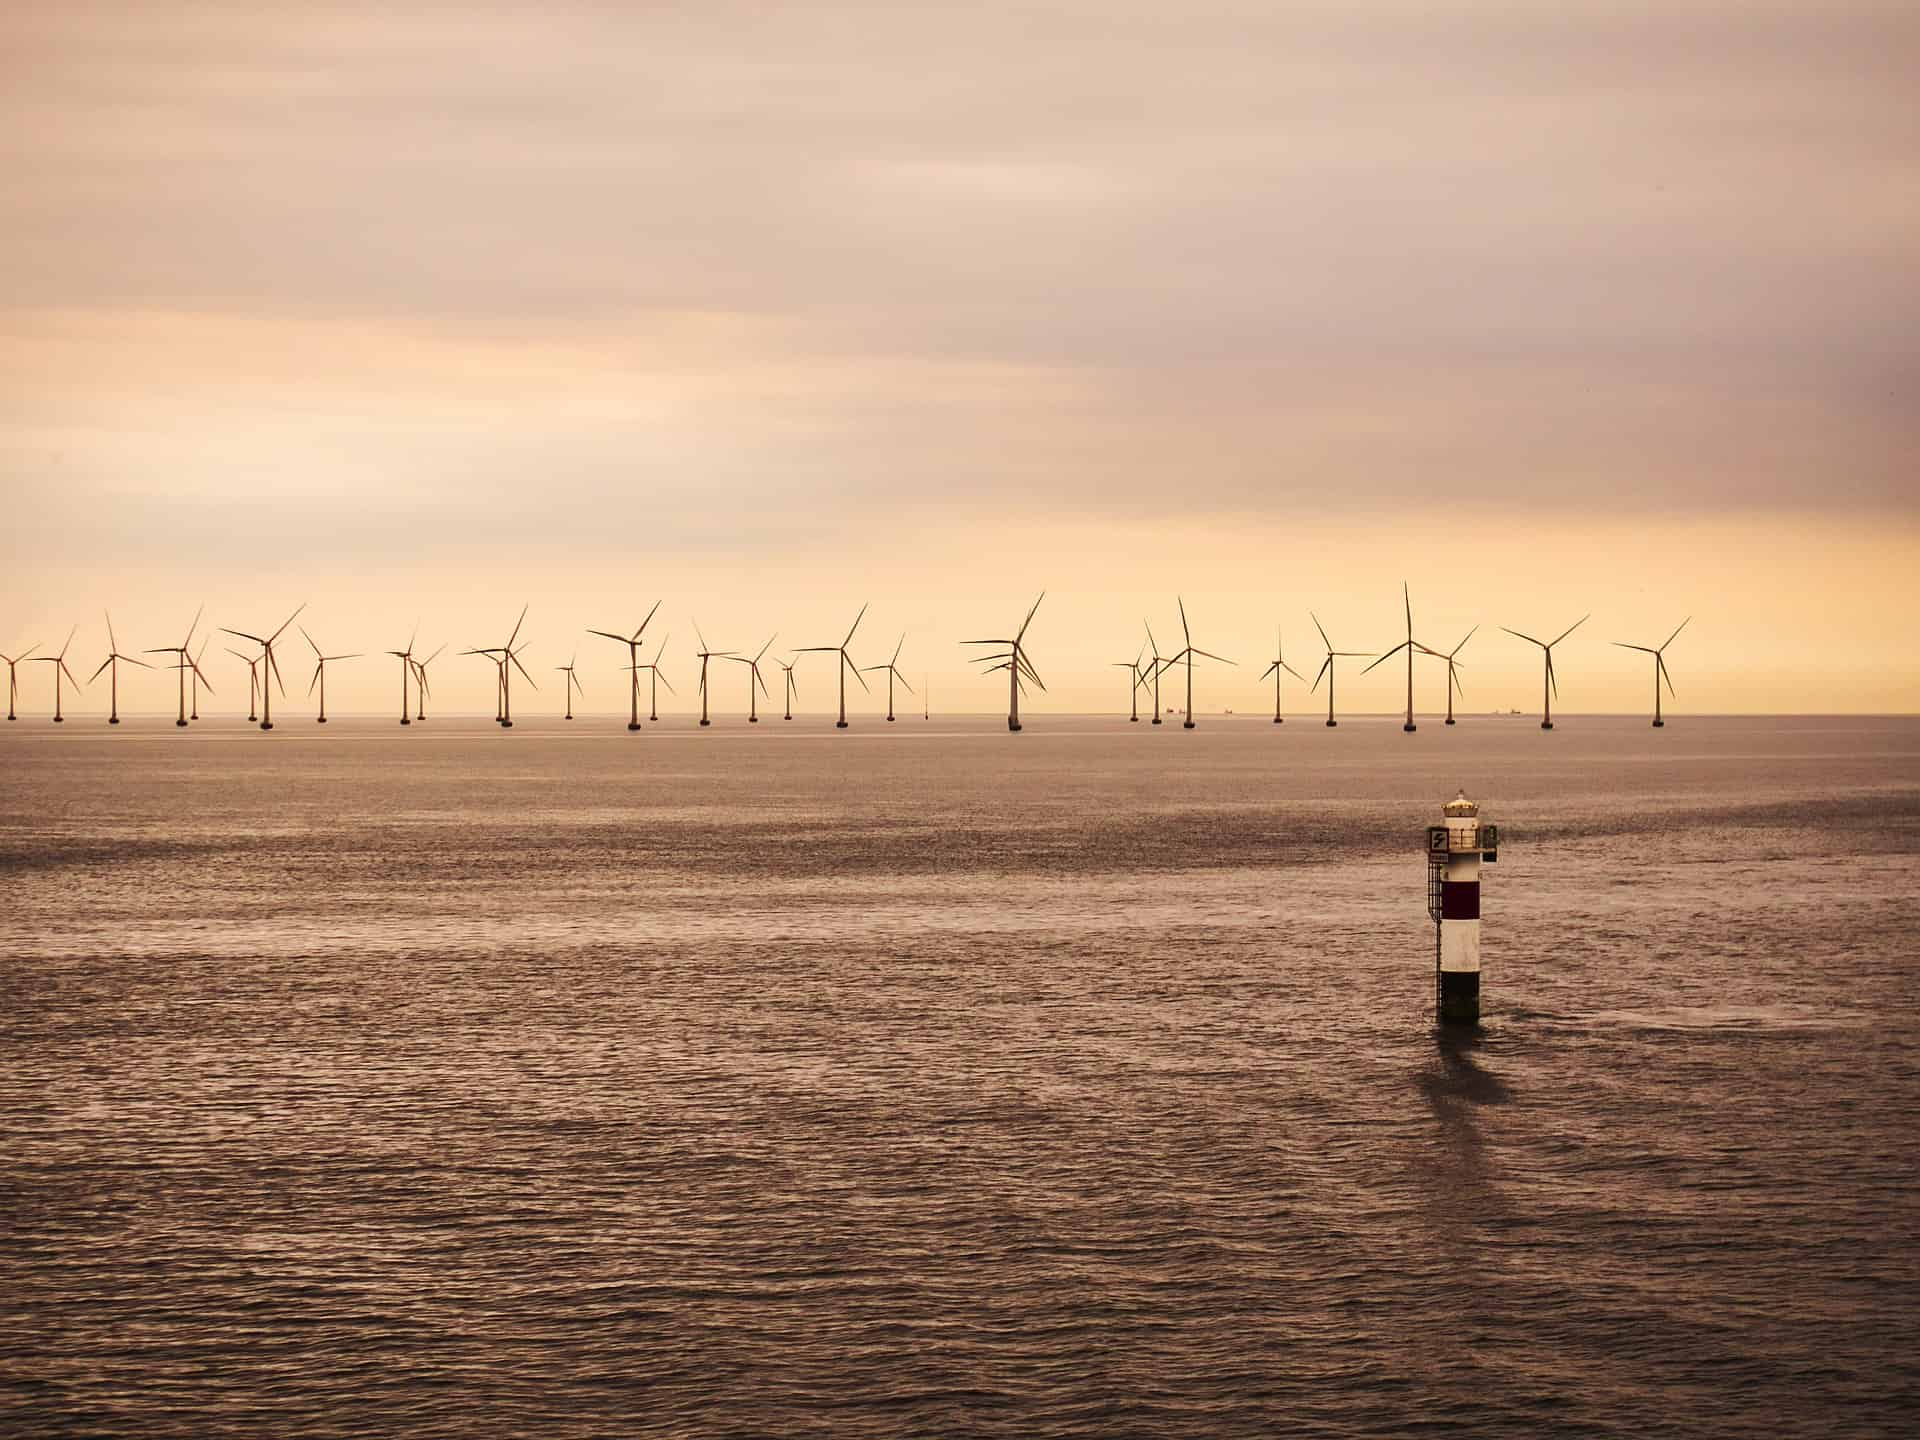 Netherlands and UK expand energy cooperation with new electricity connection